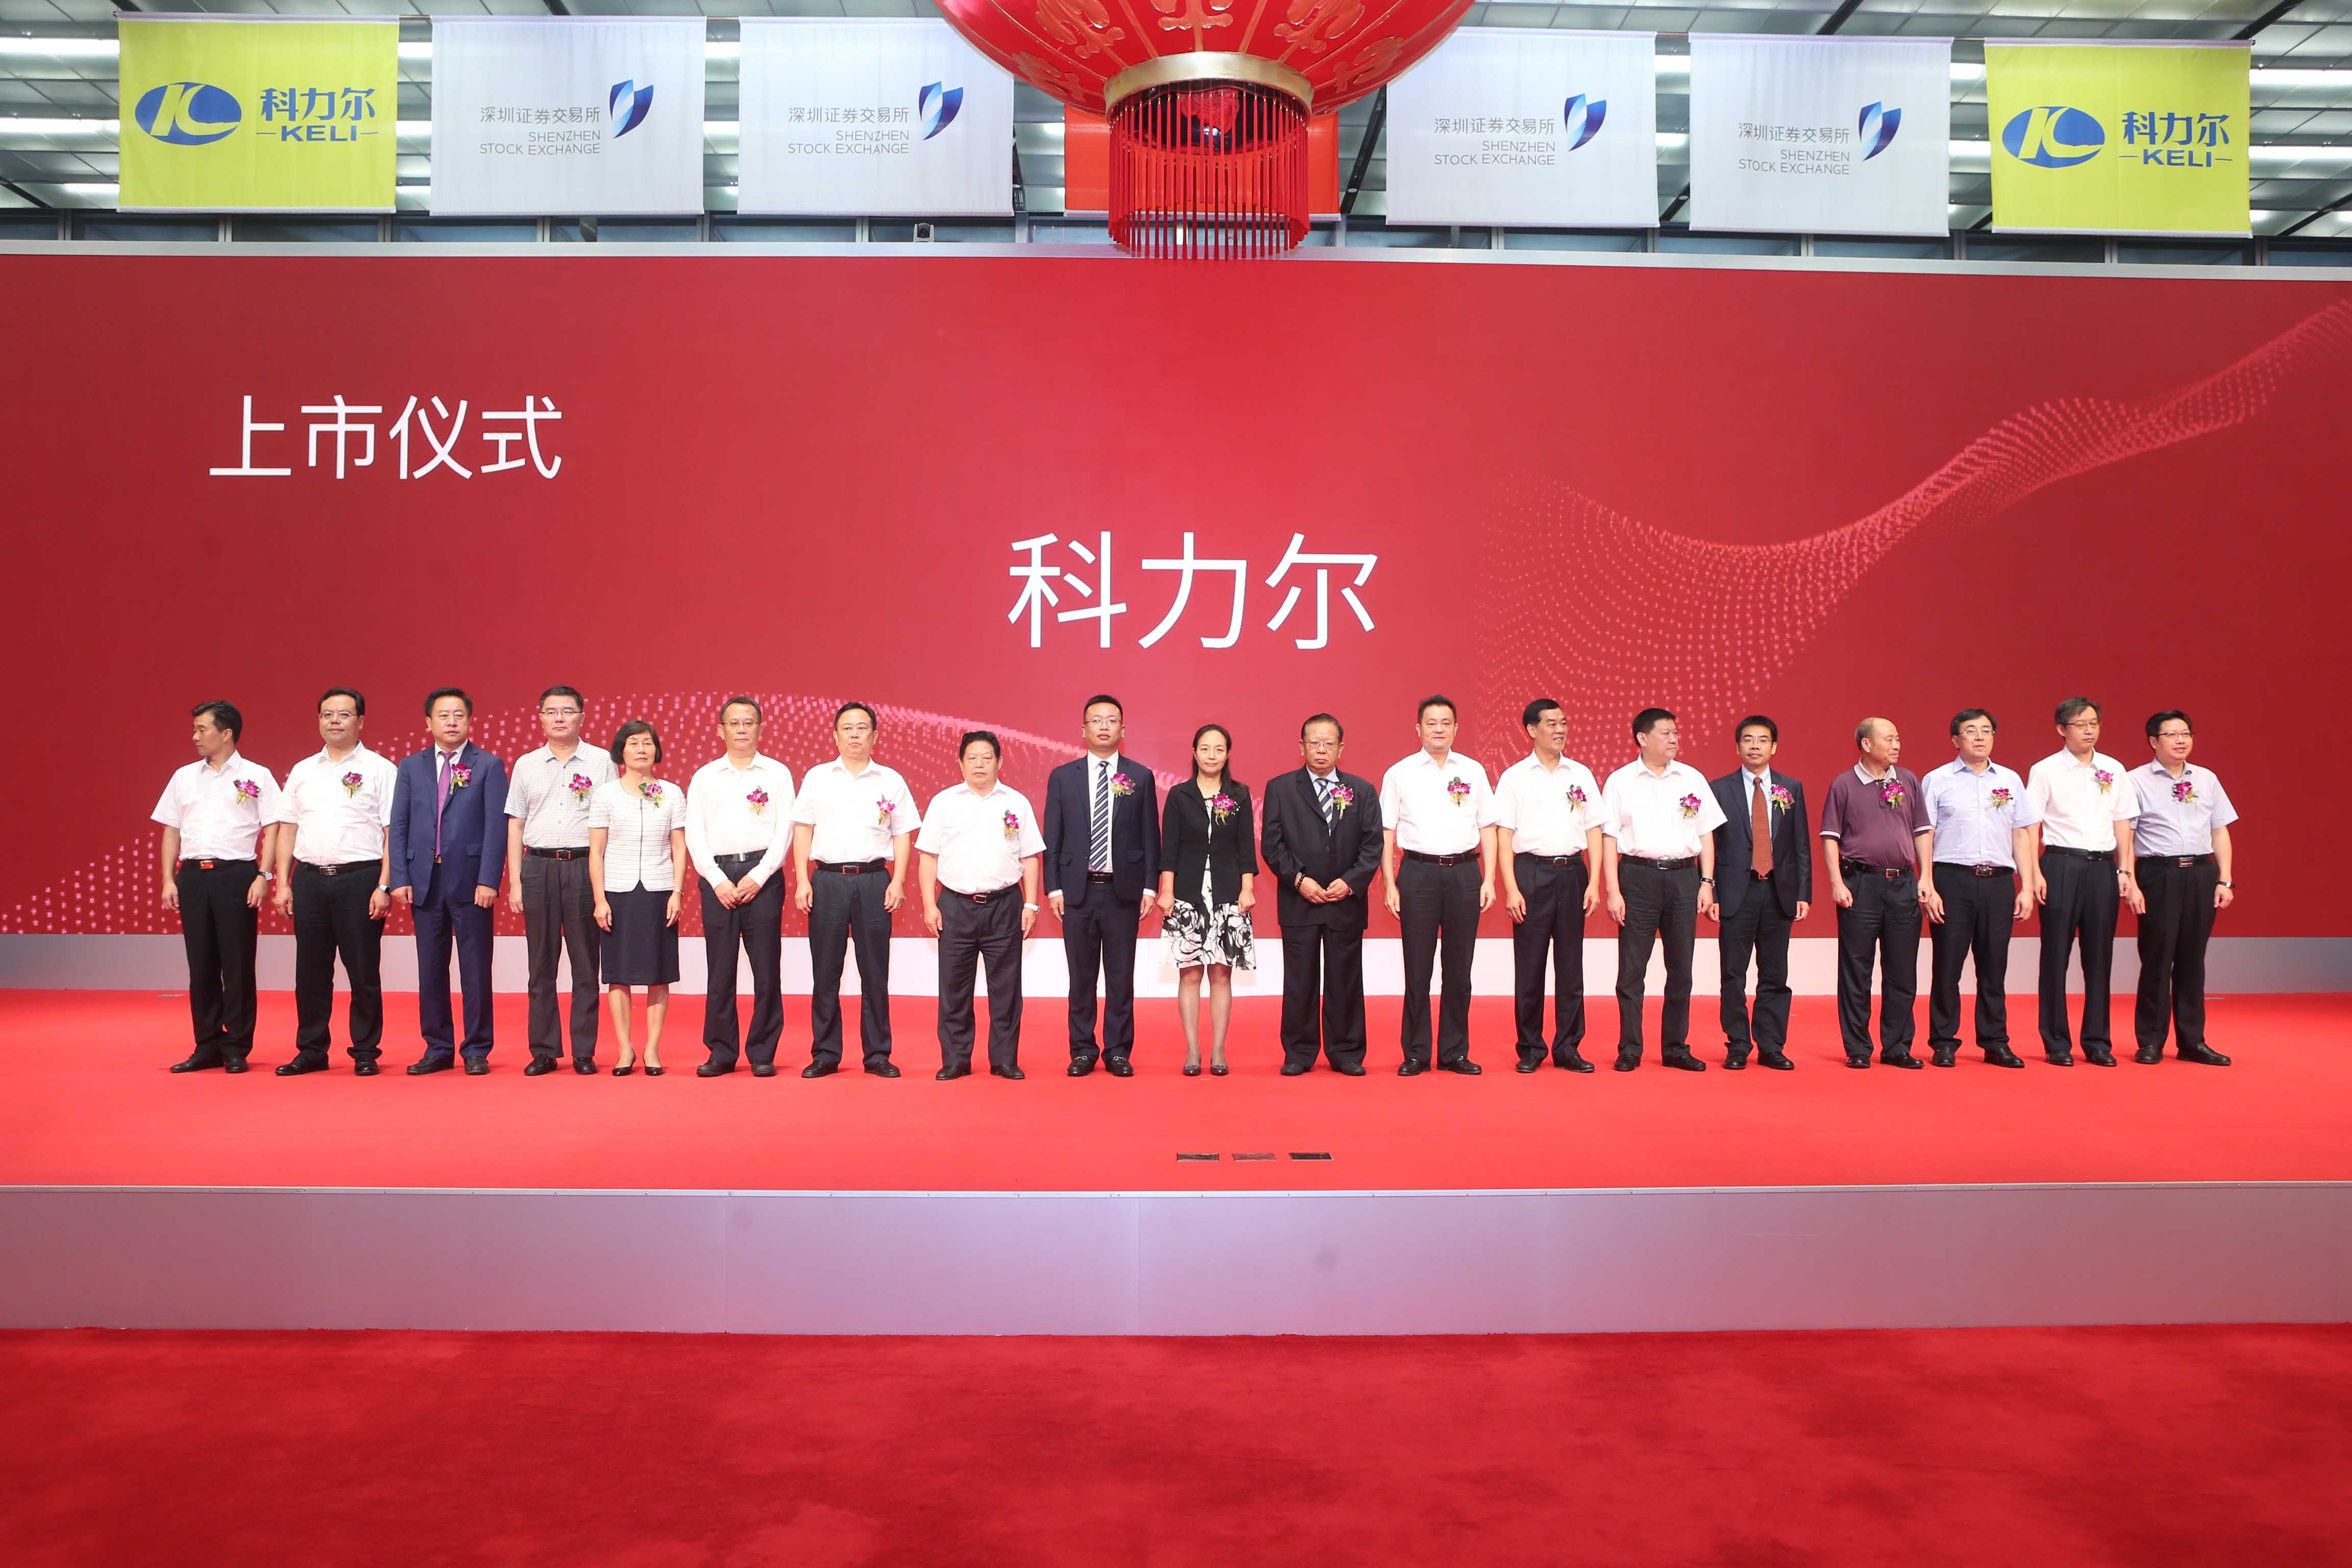 Warm congratulations to Keli for listing on the Shenzhen stock exchange SME board